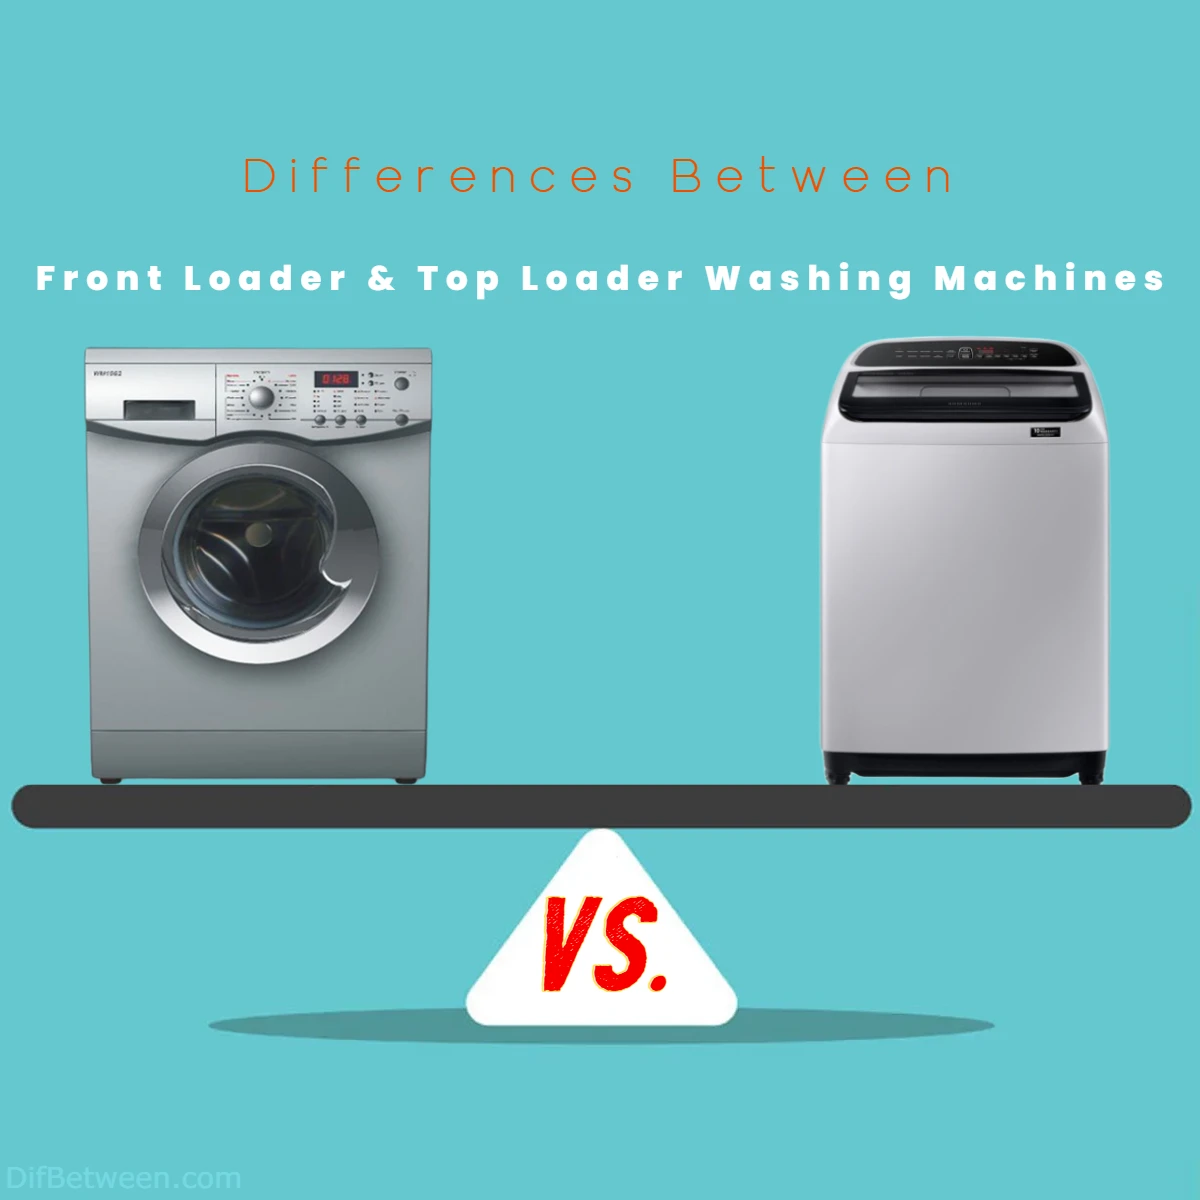 Differences Between Front Loader vs Top Loader Washing Machines